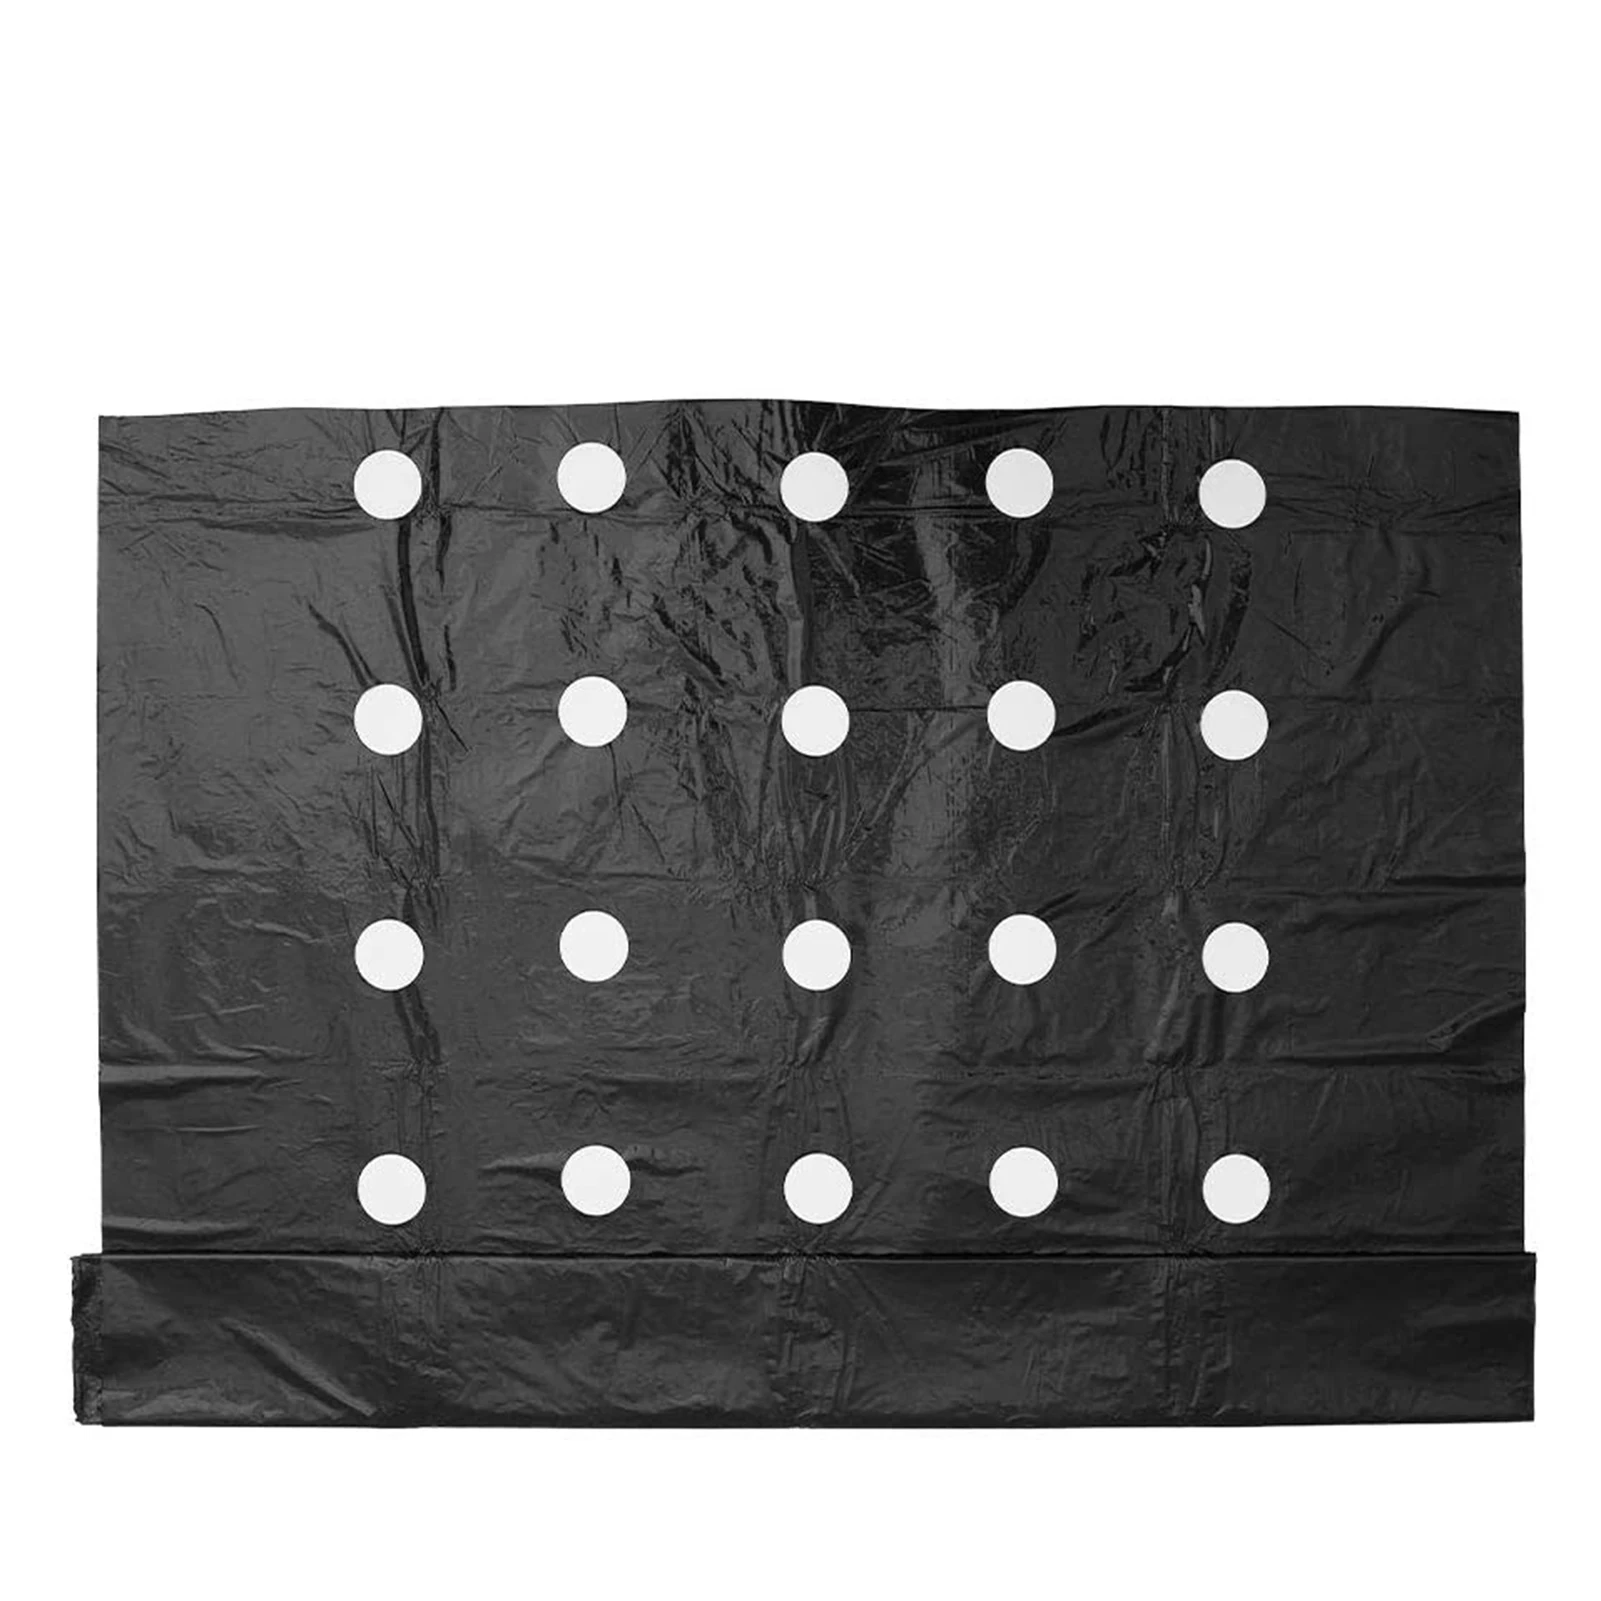 

Garden Perforated Mulch Film Lawn Weed Control Cover Mat Agriculture Film Breeding Mulch Veg Patch For Tomato Strawberry Growth